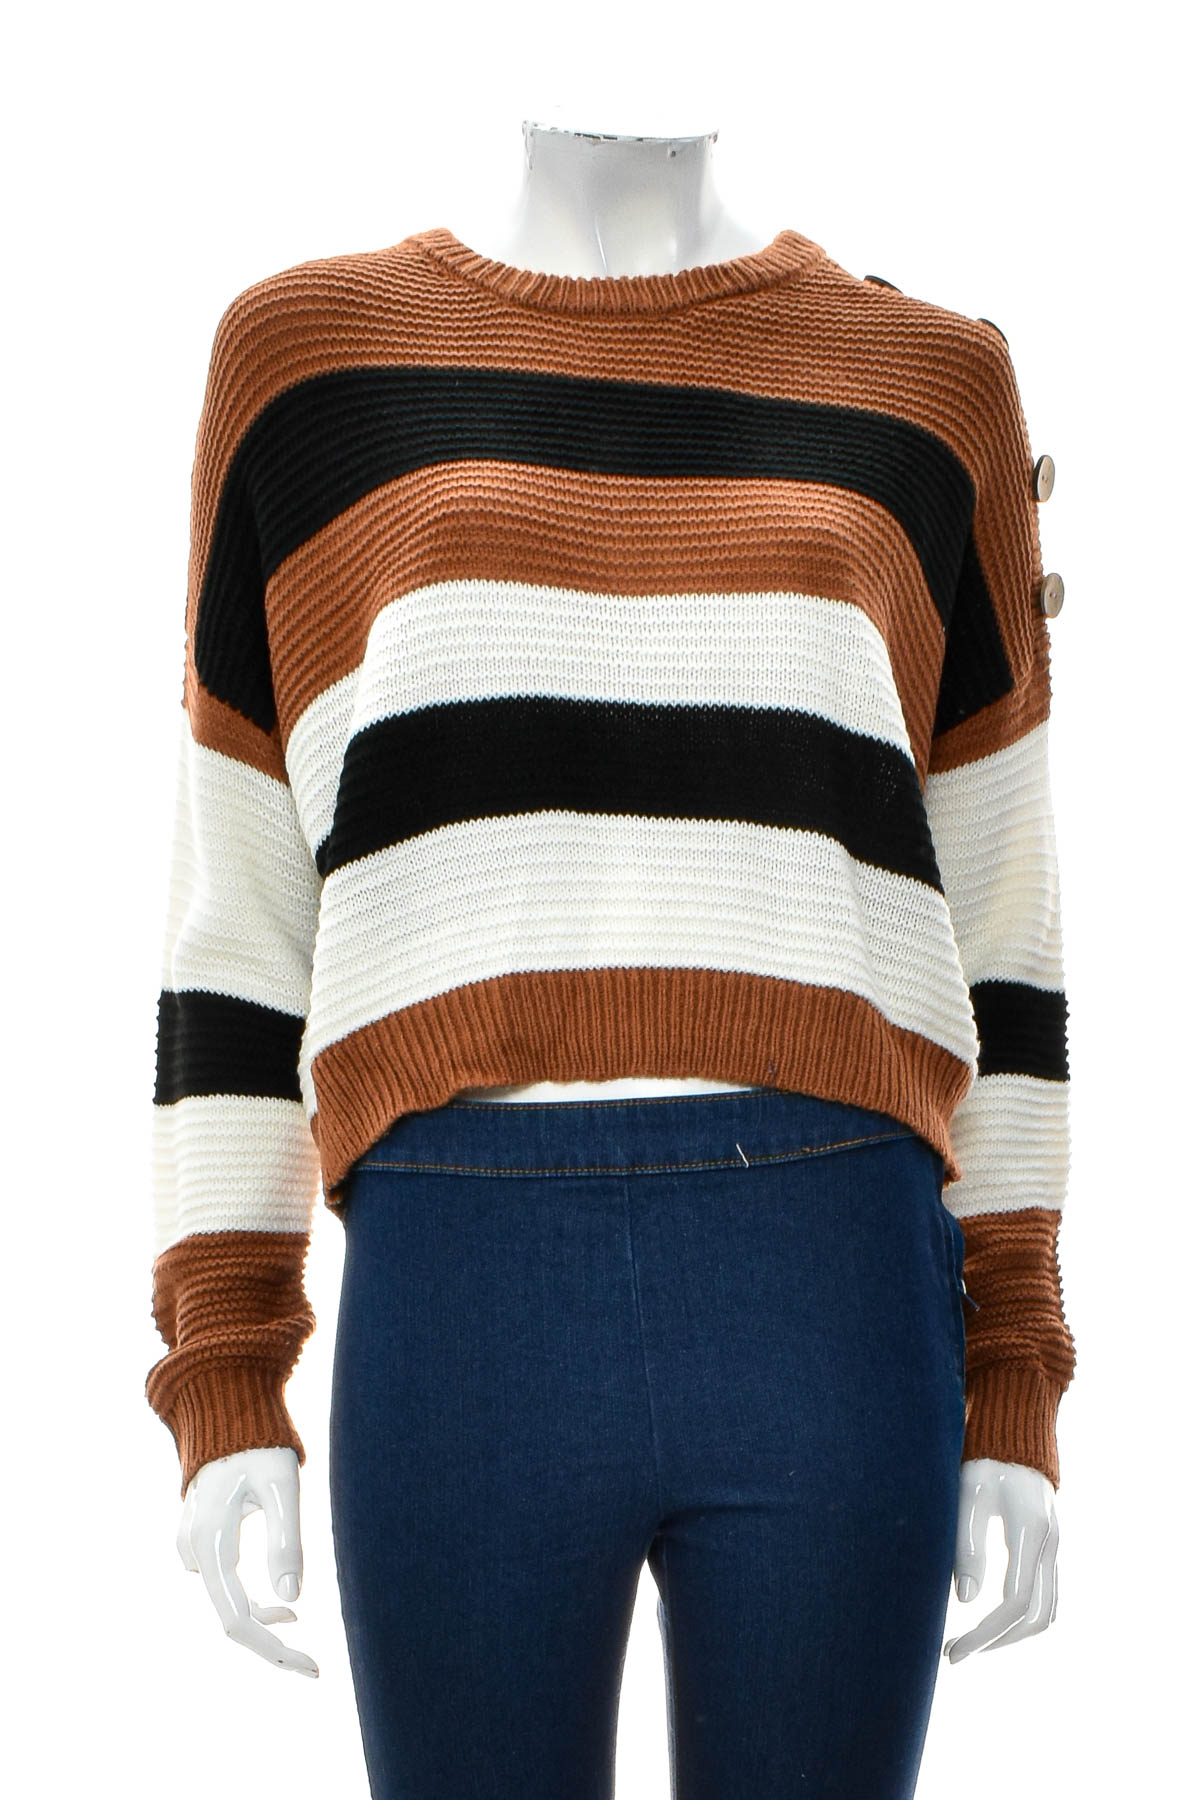 Women's sweater - Polly & Esther - 0